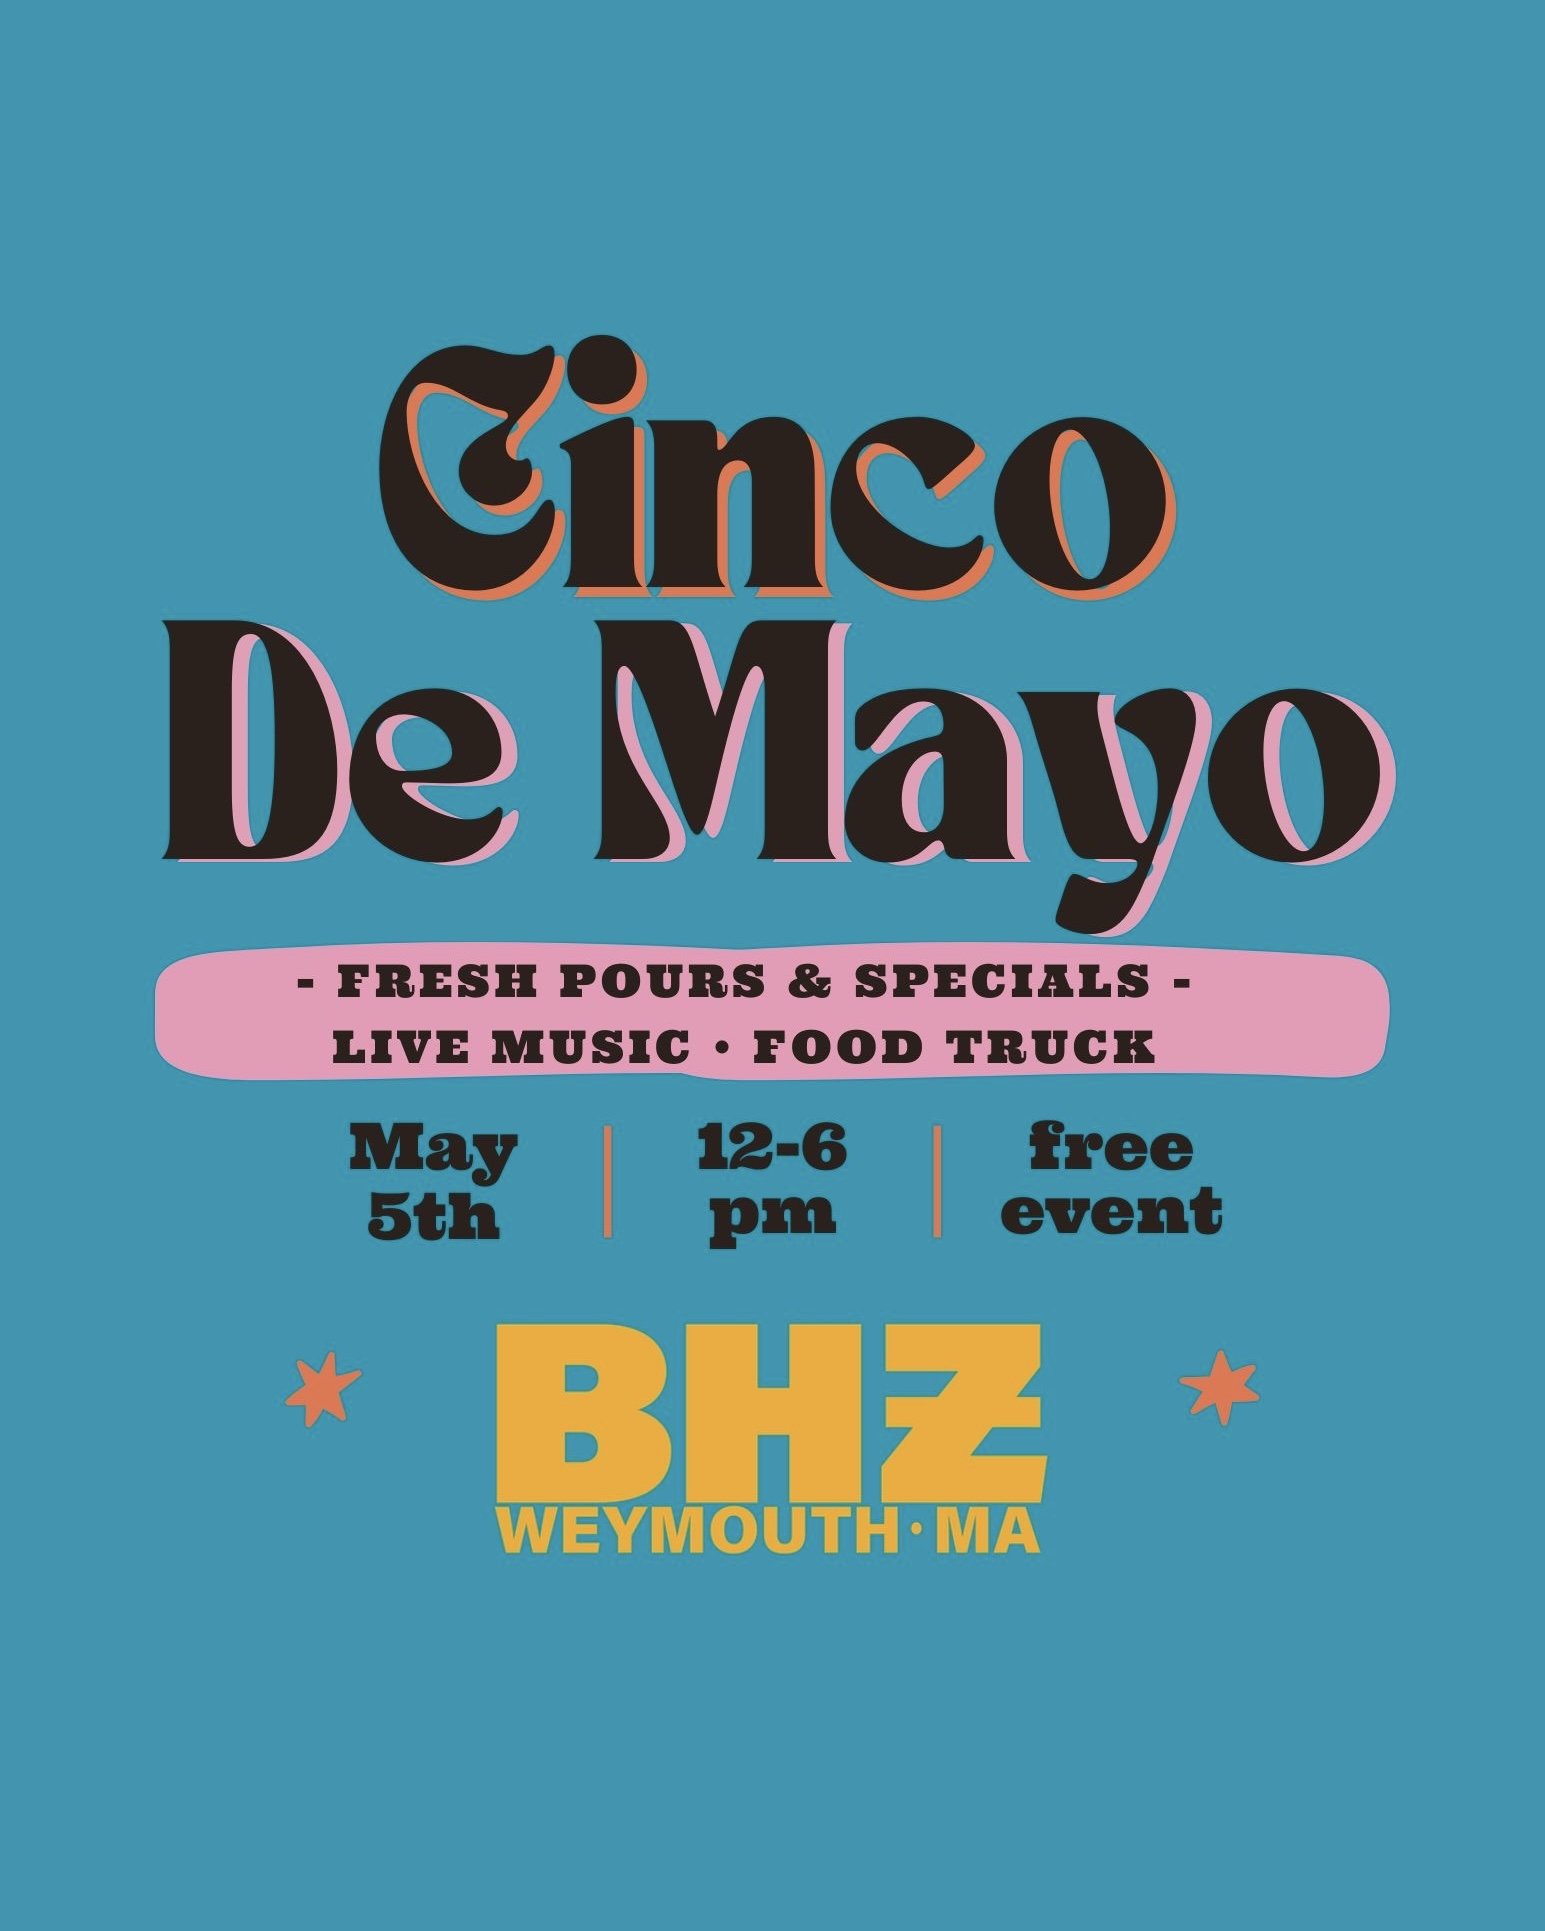 Celebrate Cinco de Mayo with us 🍹😄🍻 live music from Boston based guitarist, Armando - fresh pours - specialty drinks - specials from @wanderlustglobalfood 

Party starts at 12pm! Music 2-5pm! See you there!